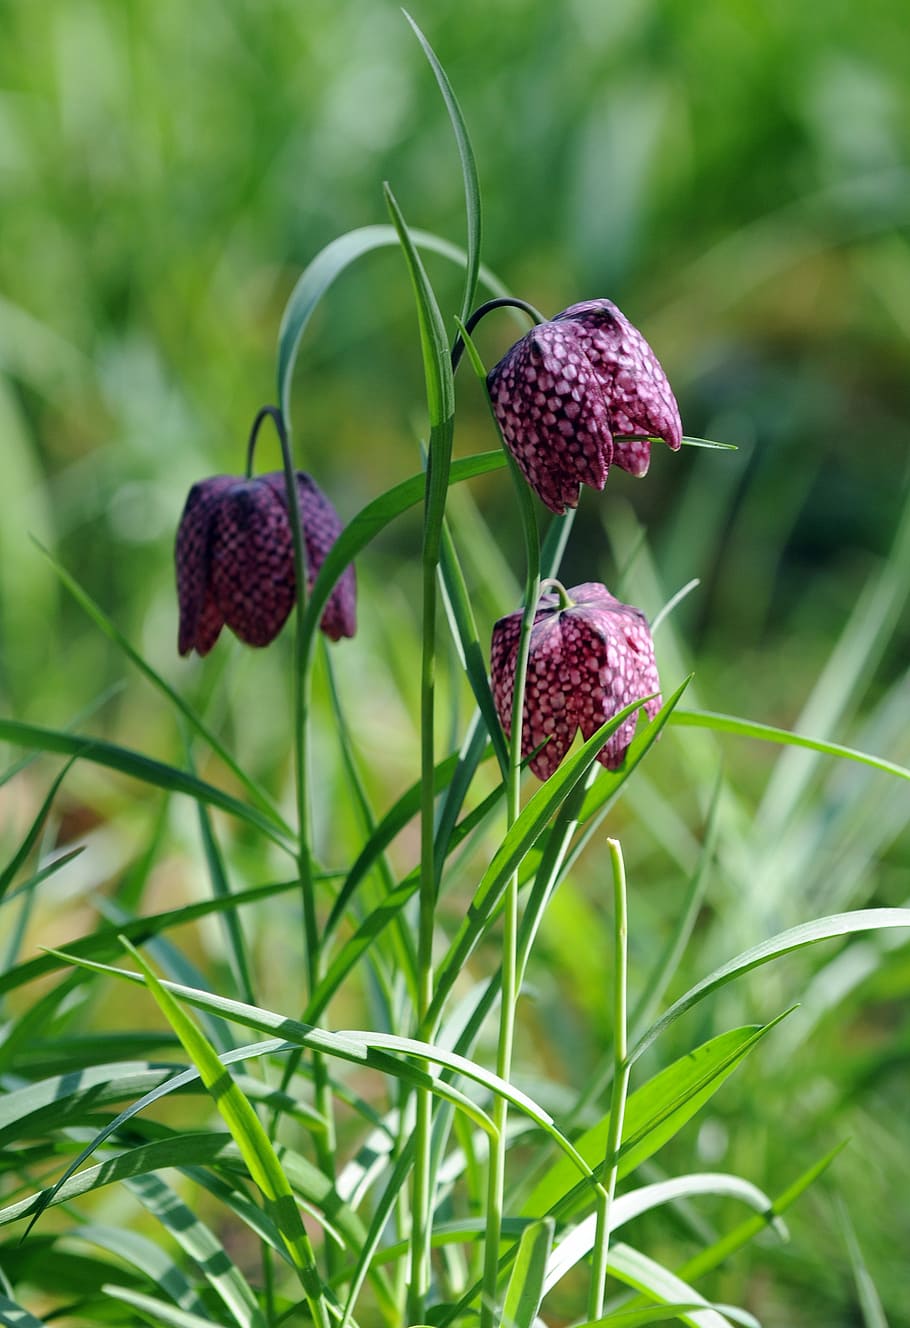 fritillaria guinea fowl, flower, garden, plant, nature, growth, freshness, beauty in nature, focus on foreground, flowering plant